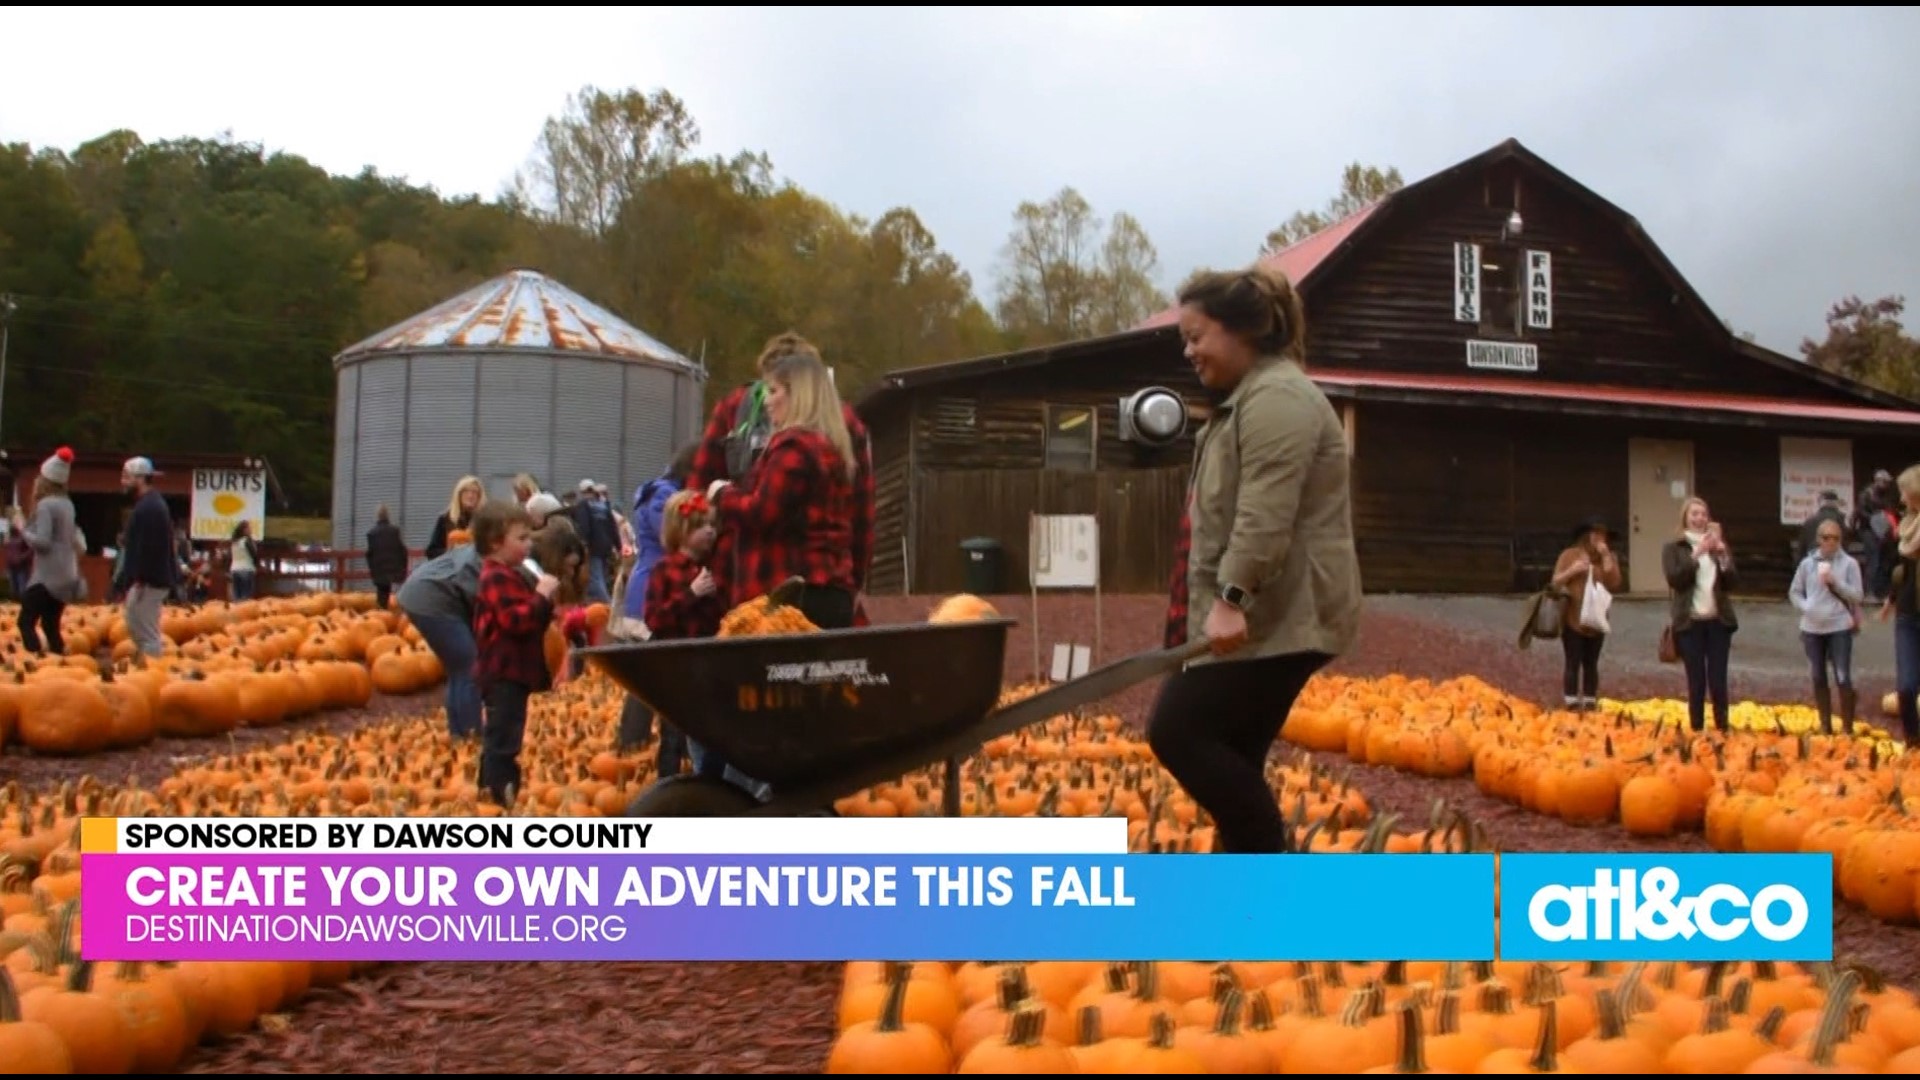 Create your own adventure in Dawson County this fall! First stop, Burt's Pumpkin Farm. Learn more at DestinationDawsonville.org | Paid Content